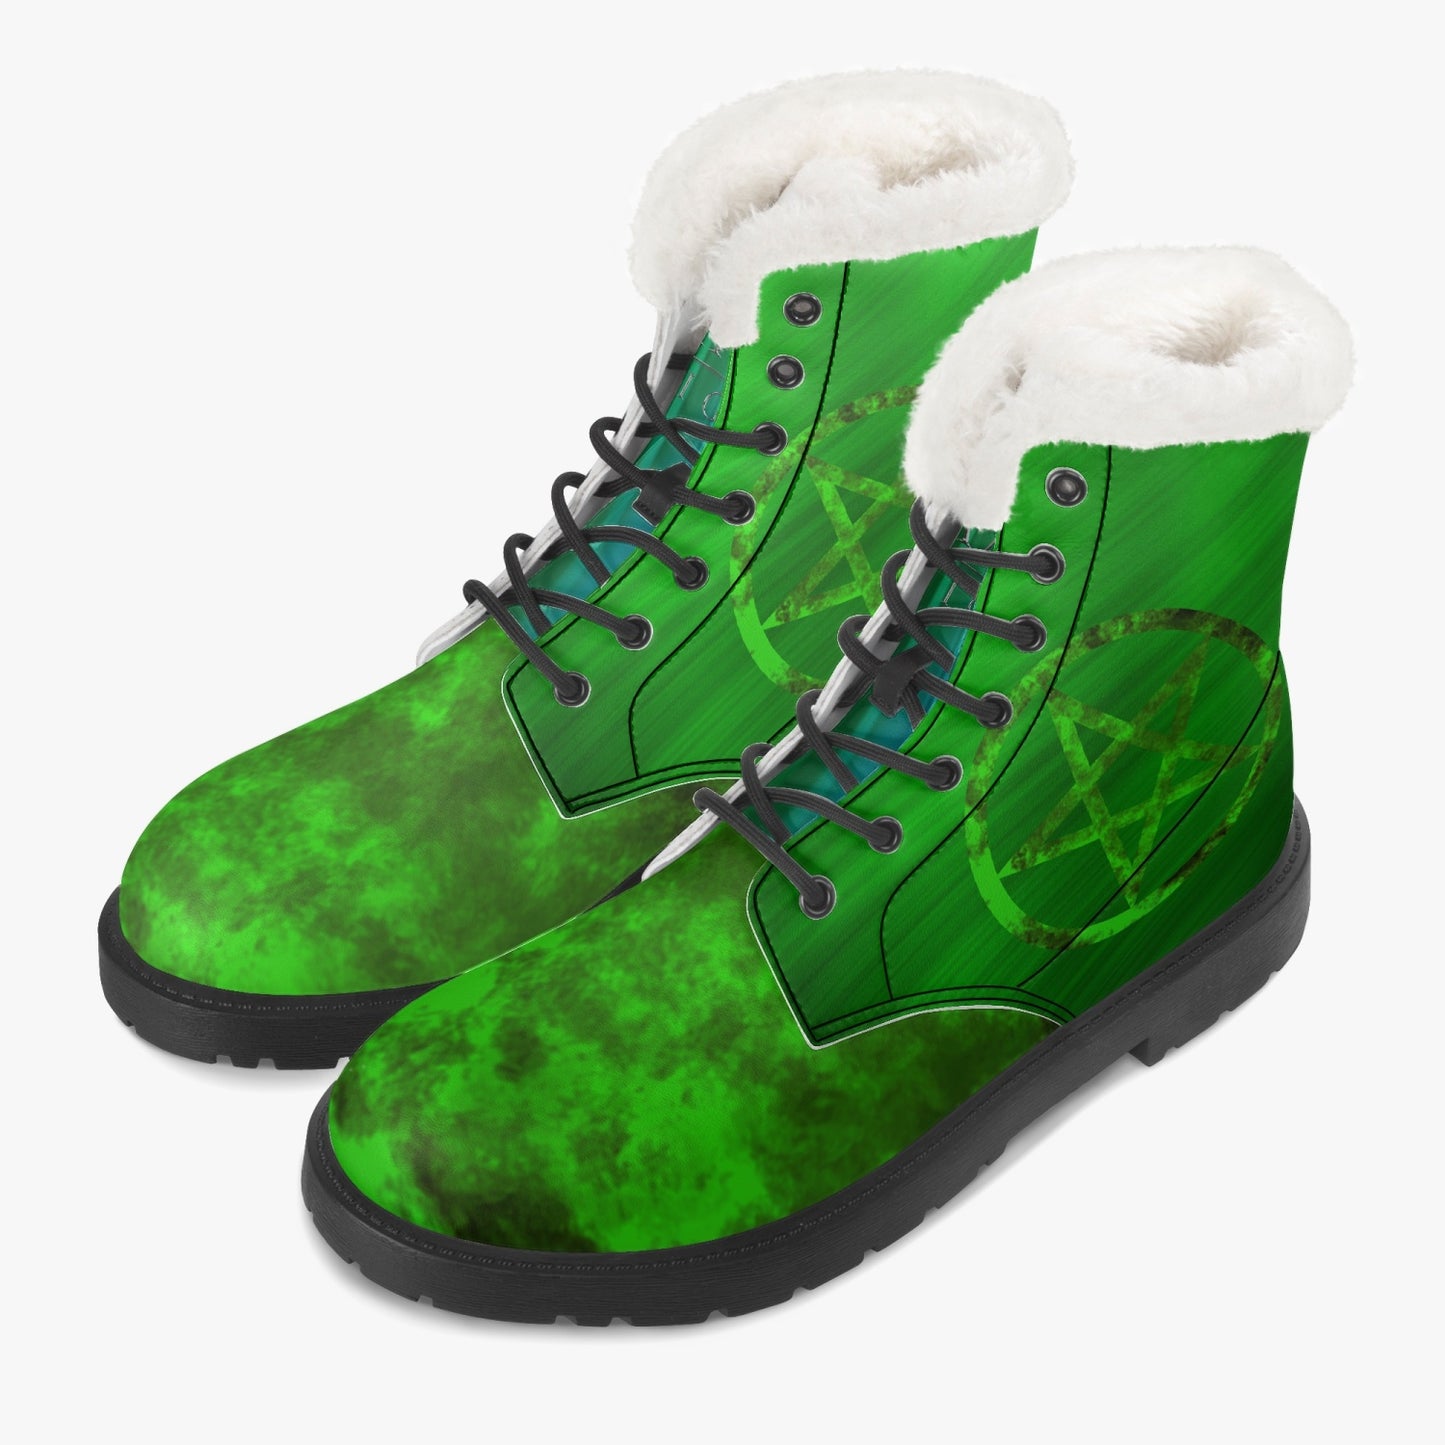 Green Fur Leather Boots